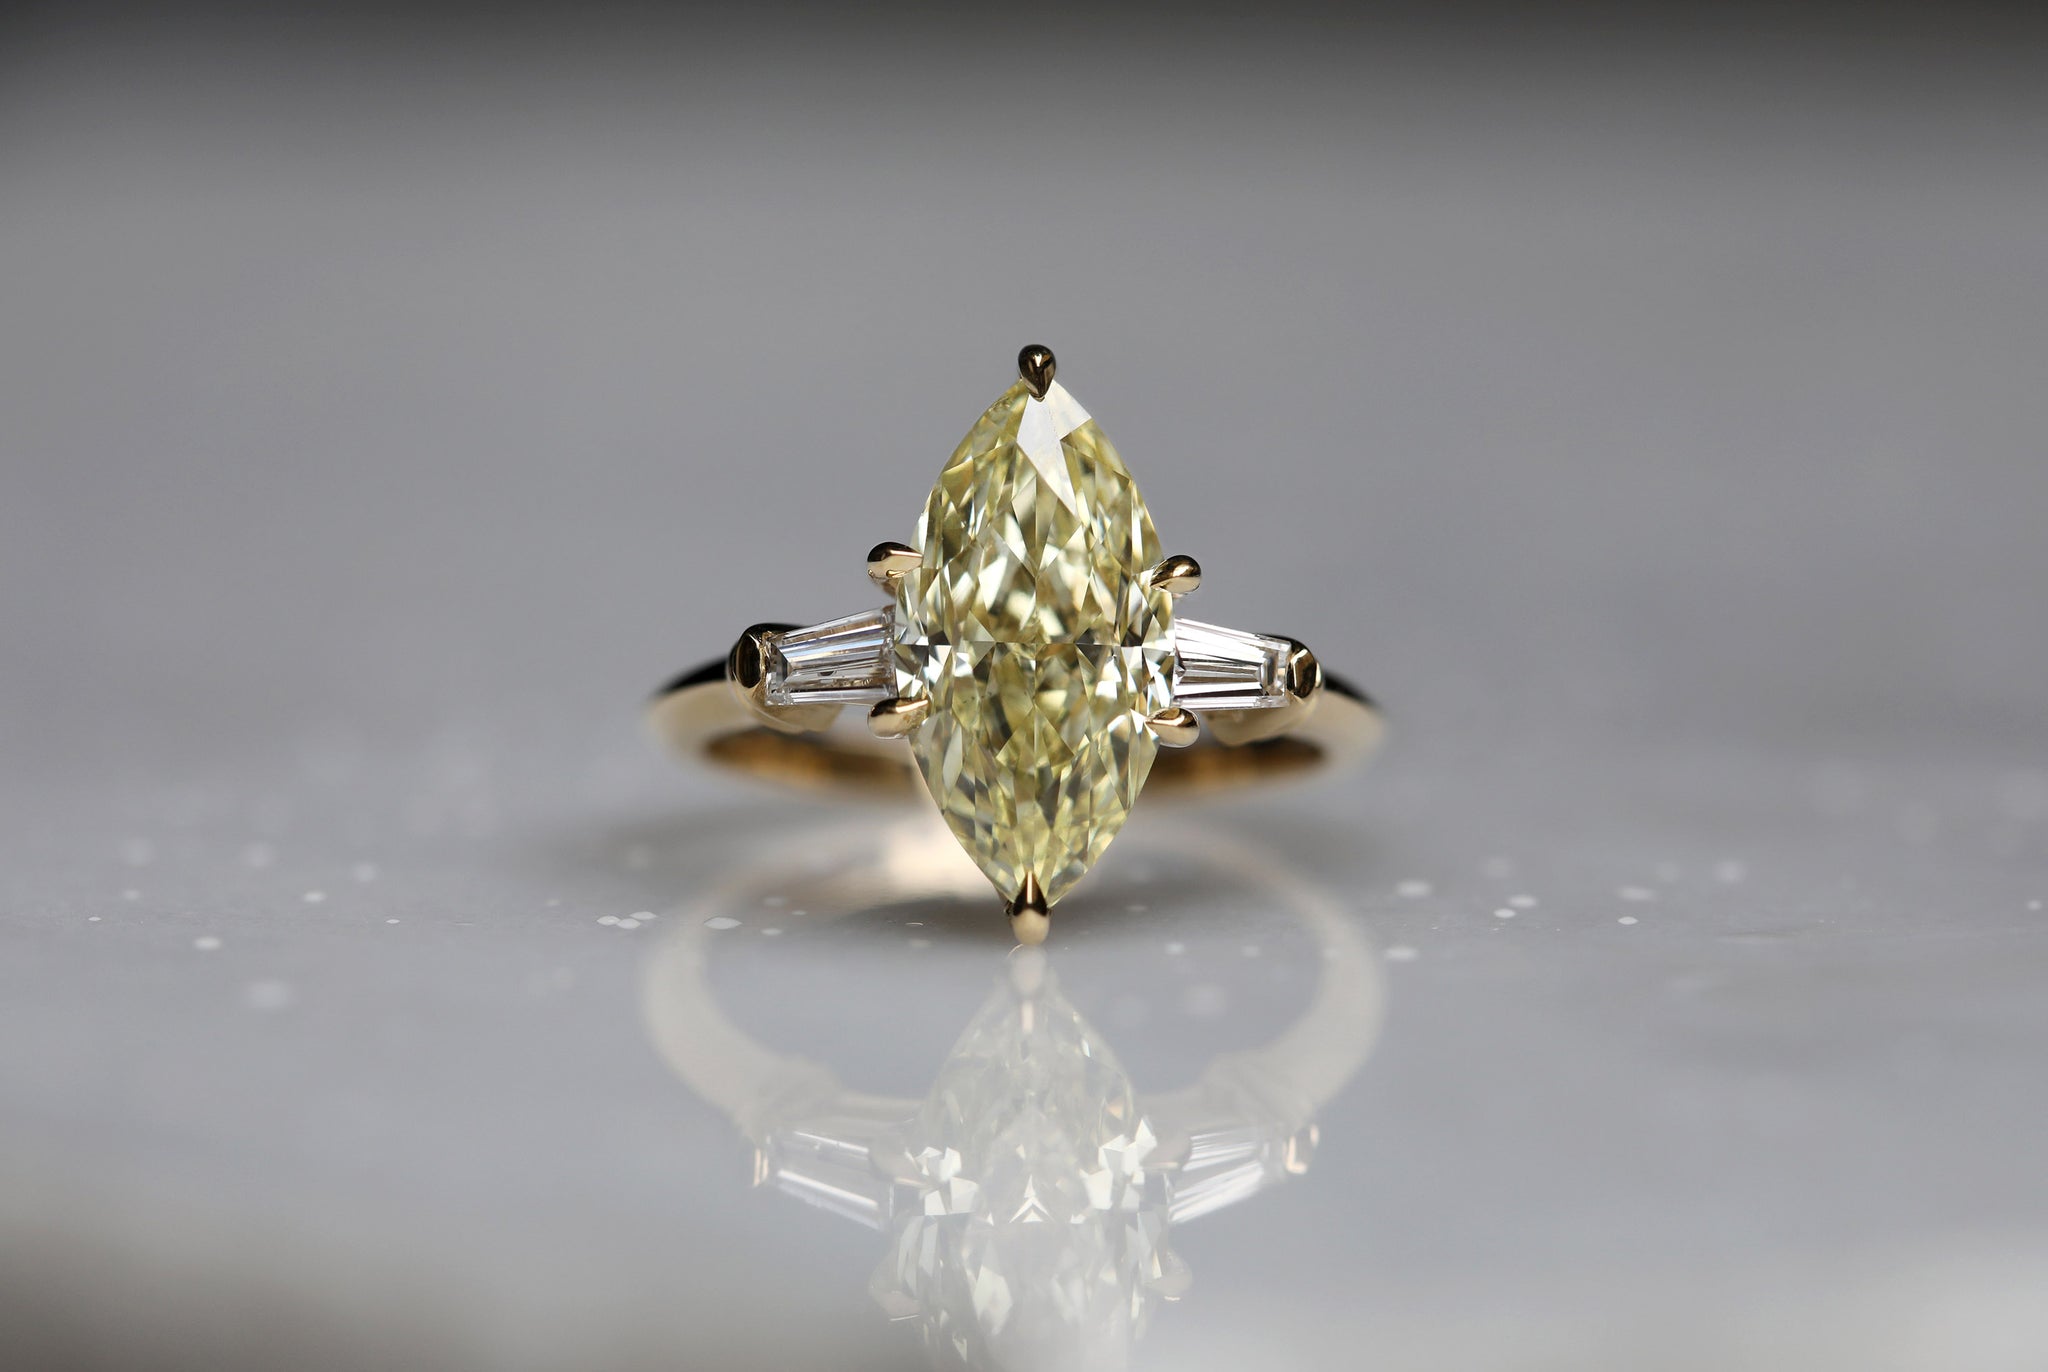 Marquise cut yellow diamond engagement ring. Handcrafted in London by east London jeweller Rachel Boston